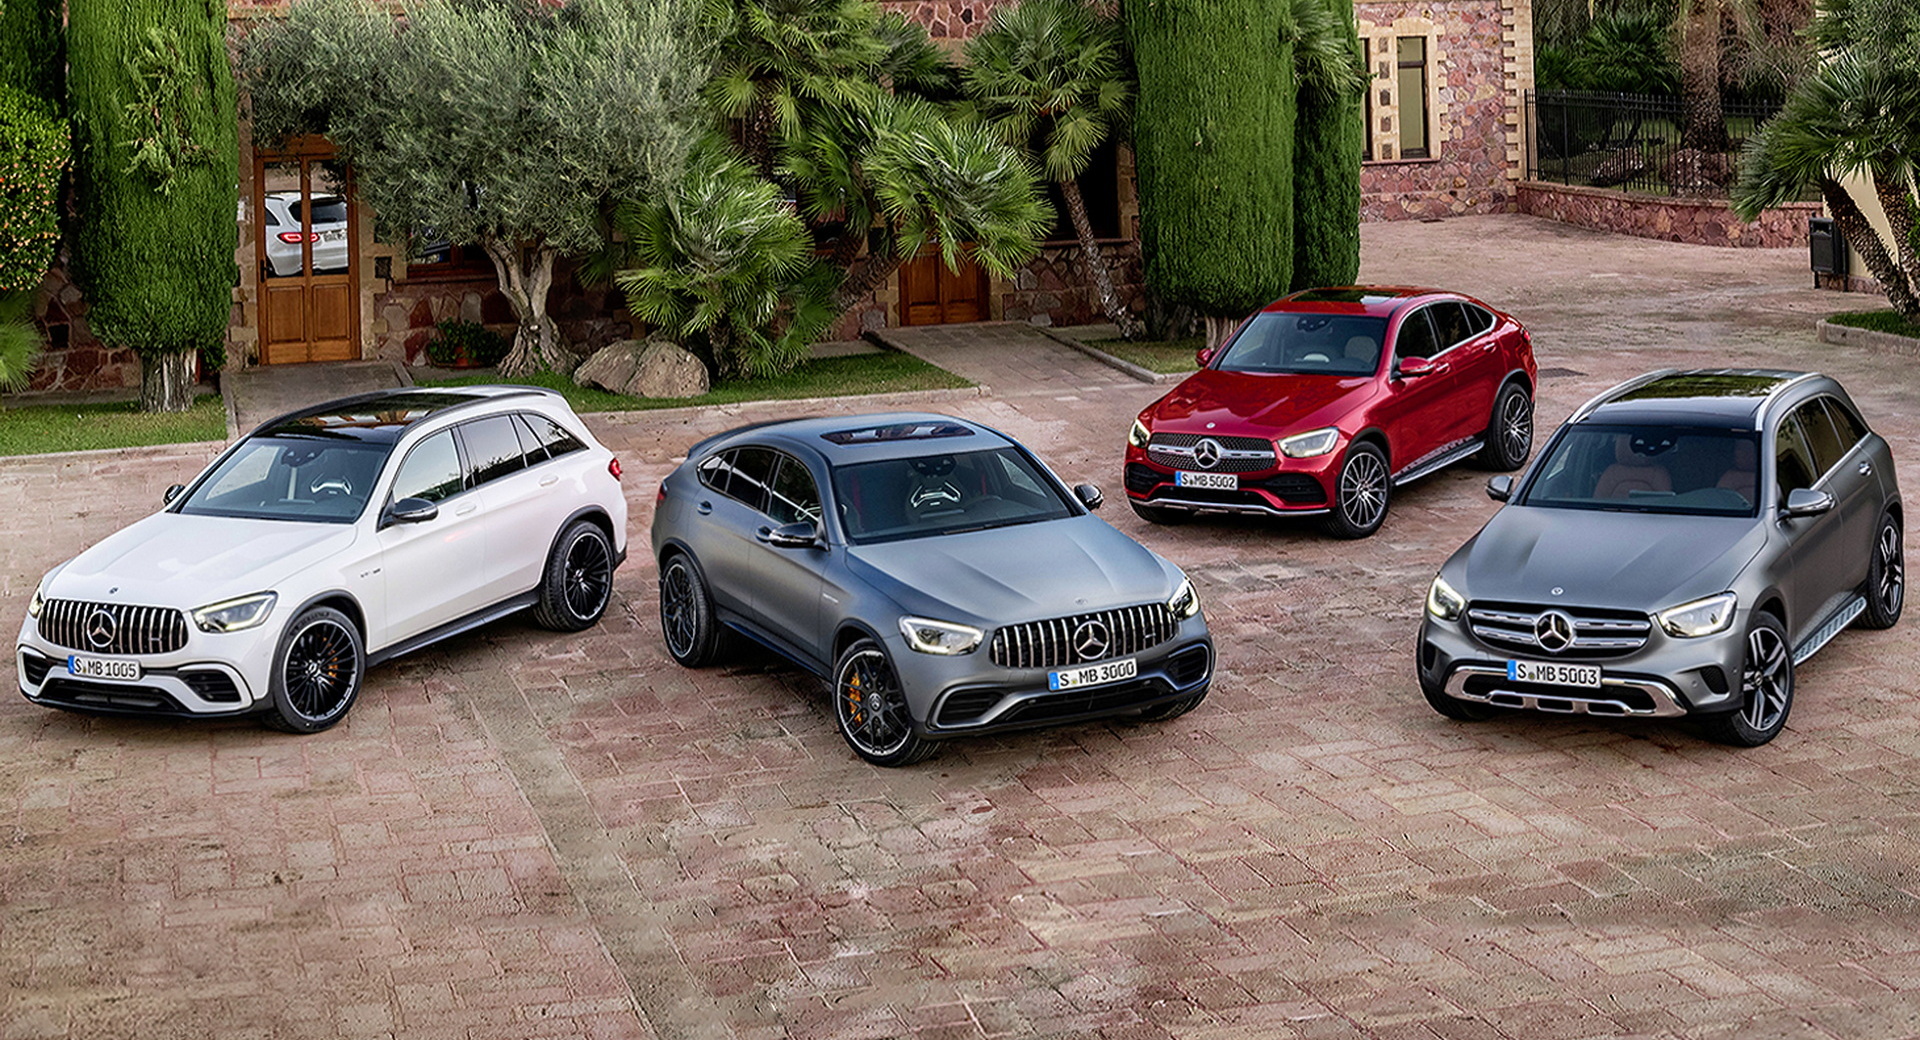 Luxury SUV growth out-paces mainstream